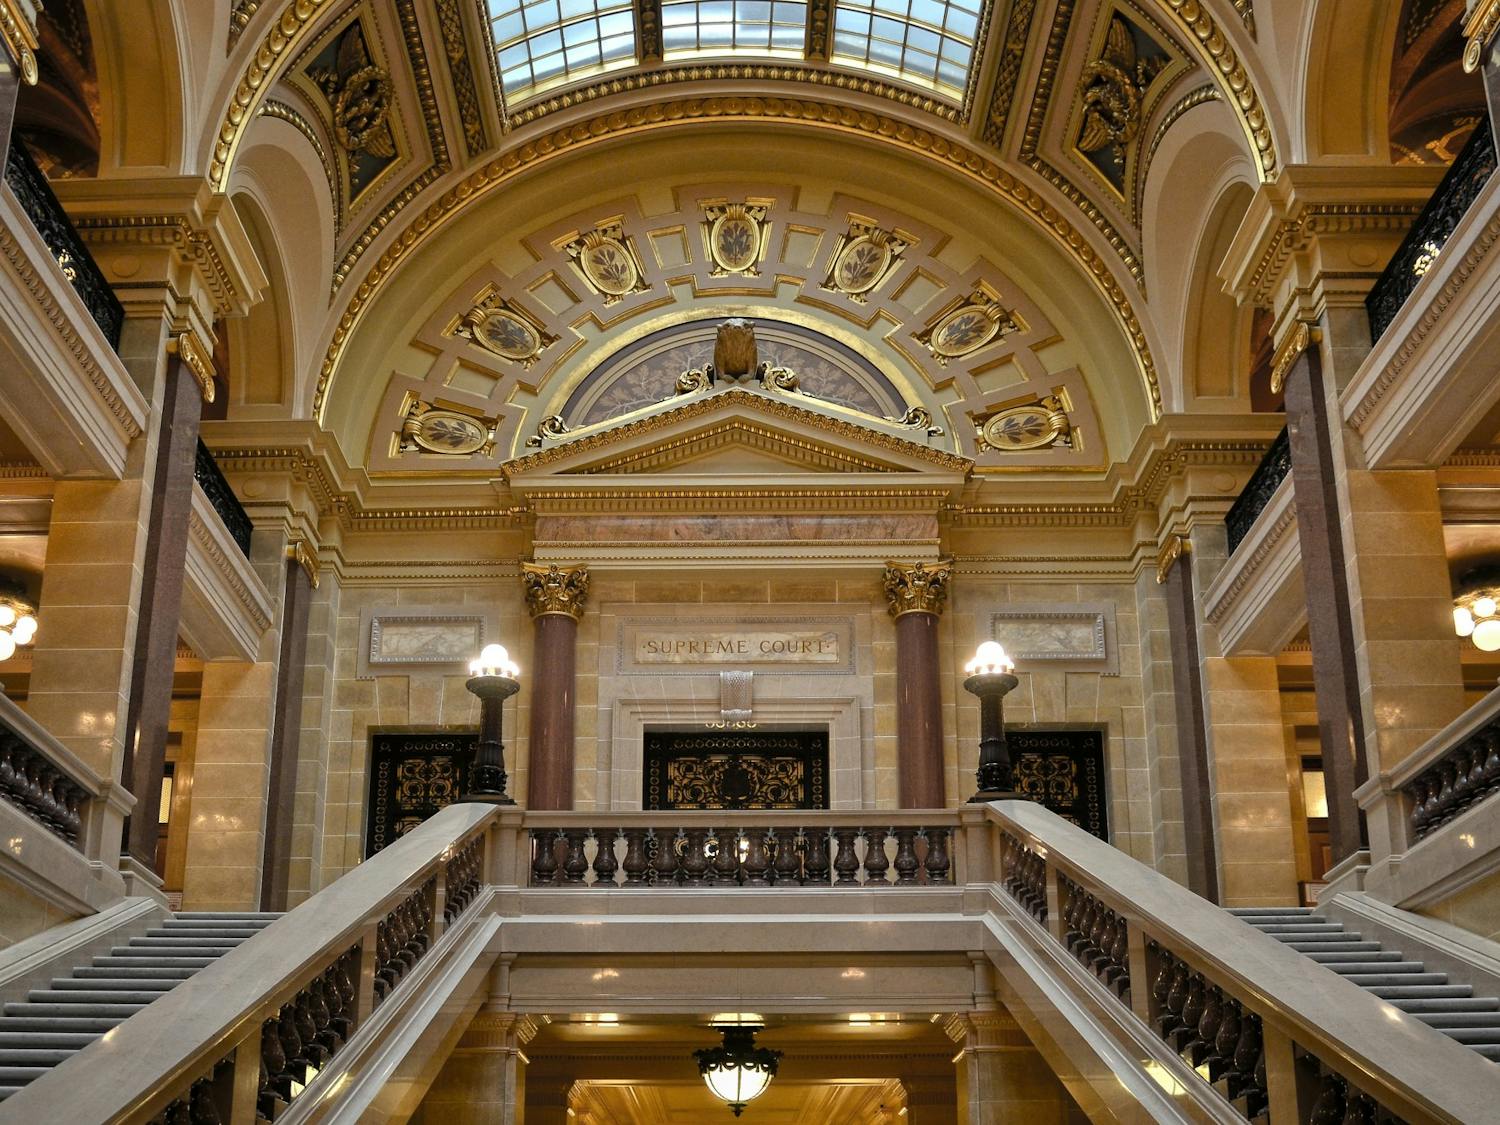 Entrance to the Wisconsin Supreme Court